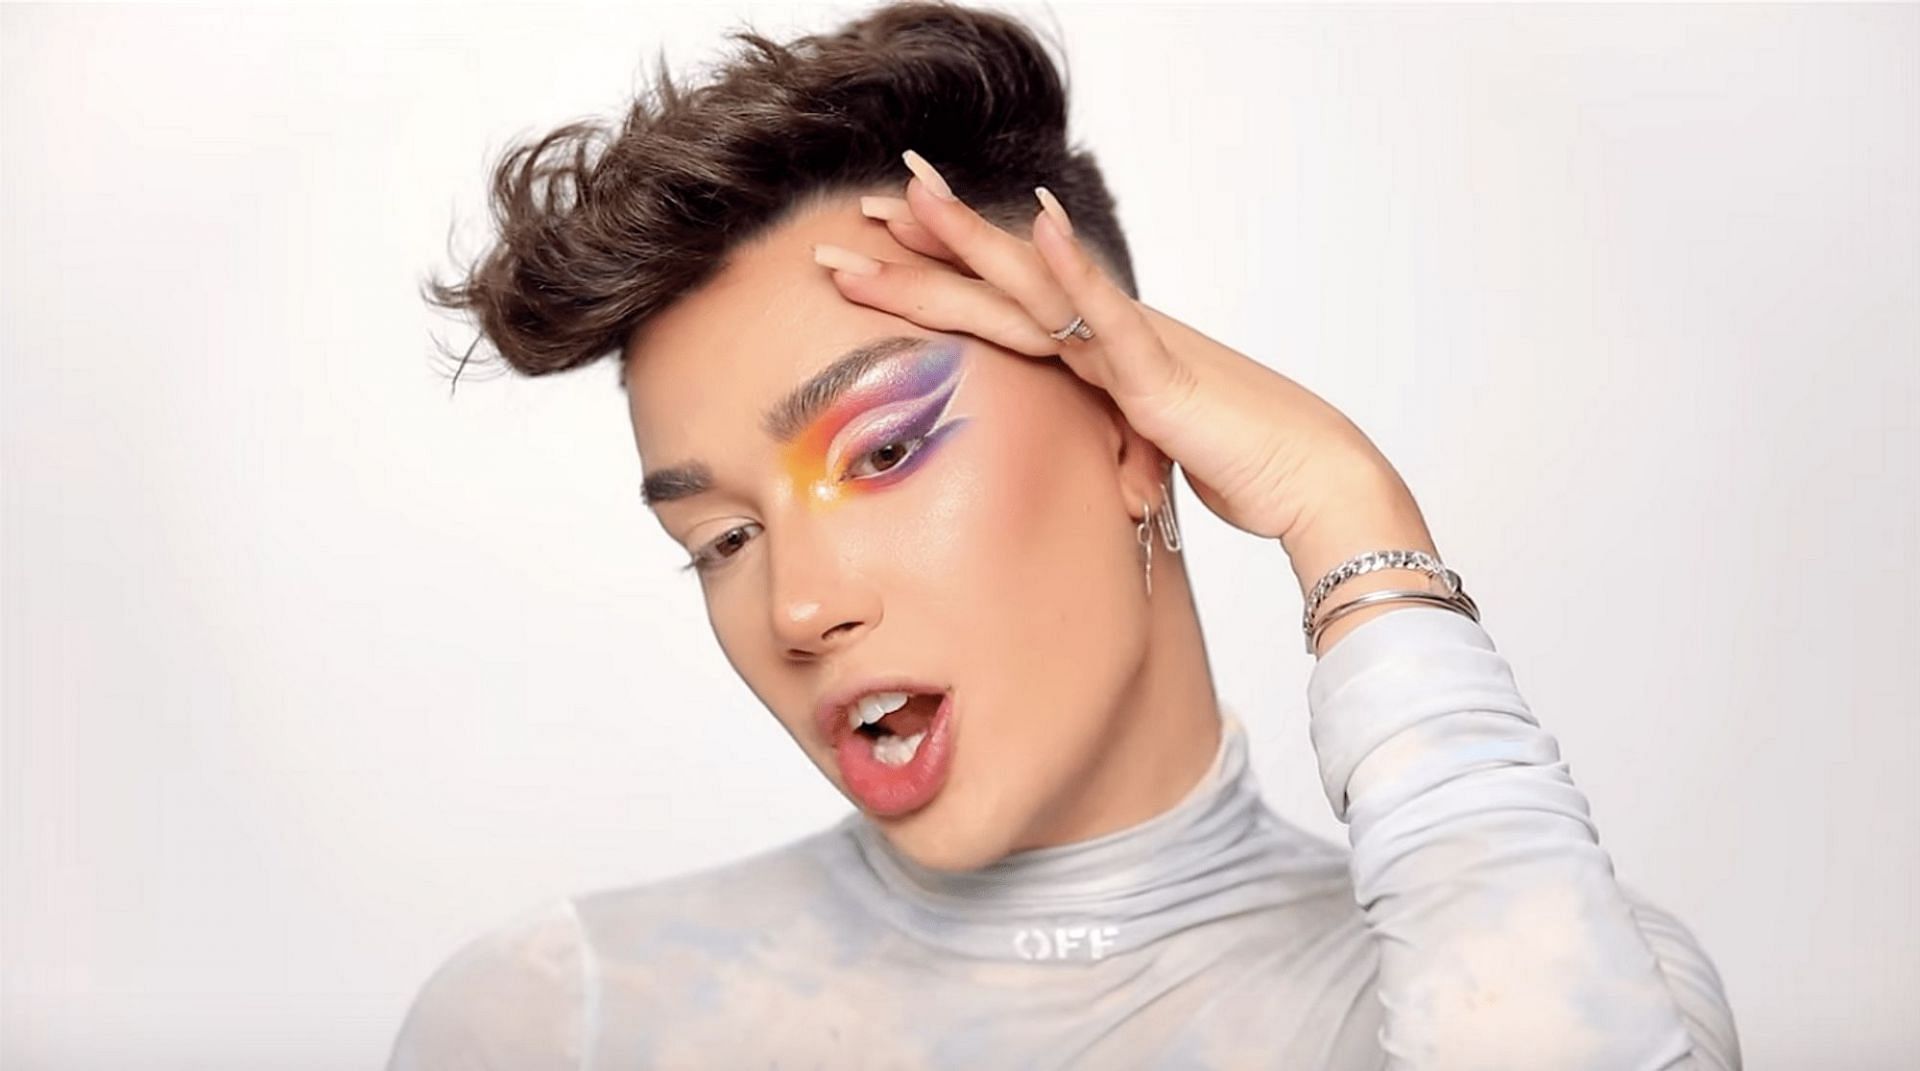 James Charles finds himself in yet another controversy (Image via YouTube/James Charles)